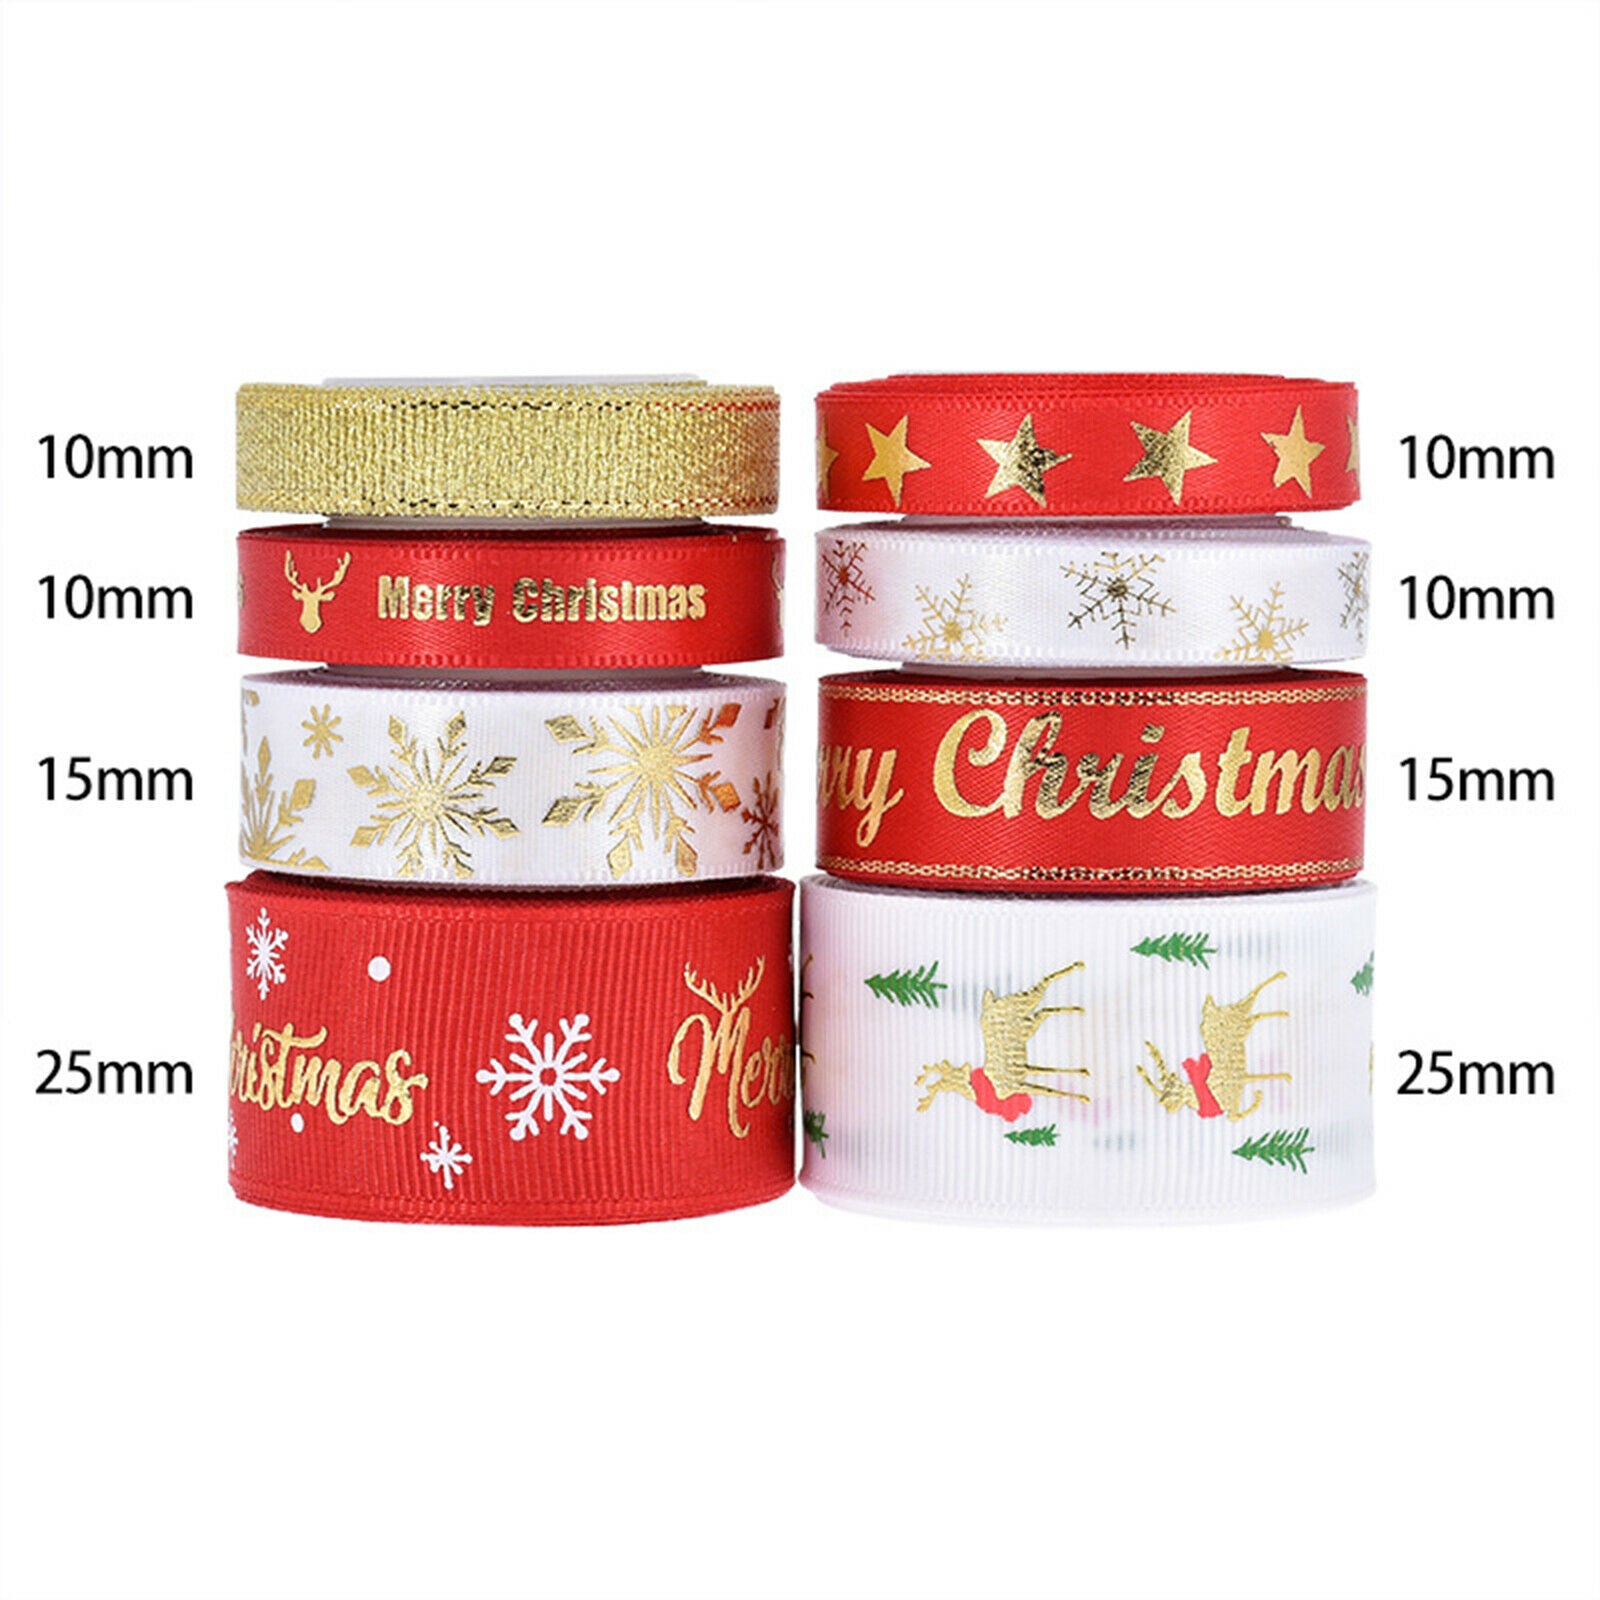 8x Christmas Ribbon Grosgrain Trimming Xmas Gift Wrapping Package Party